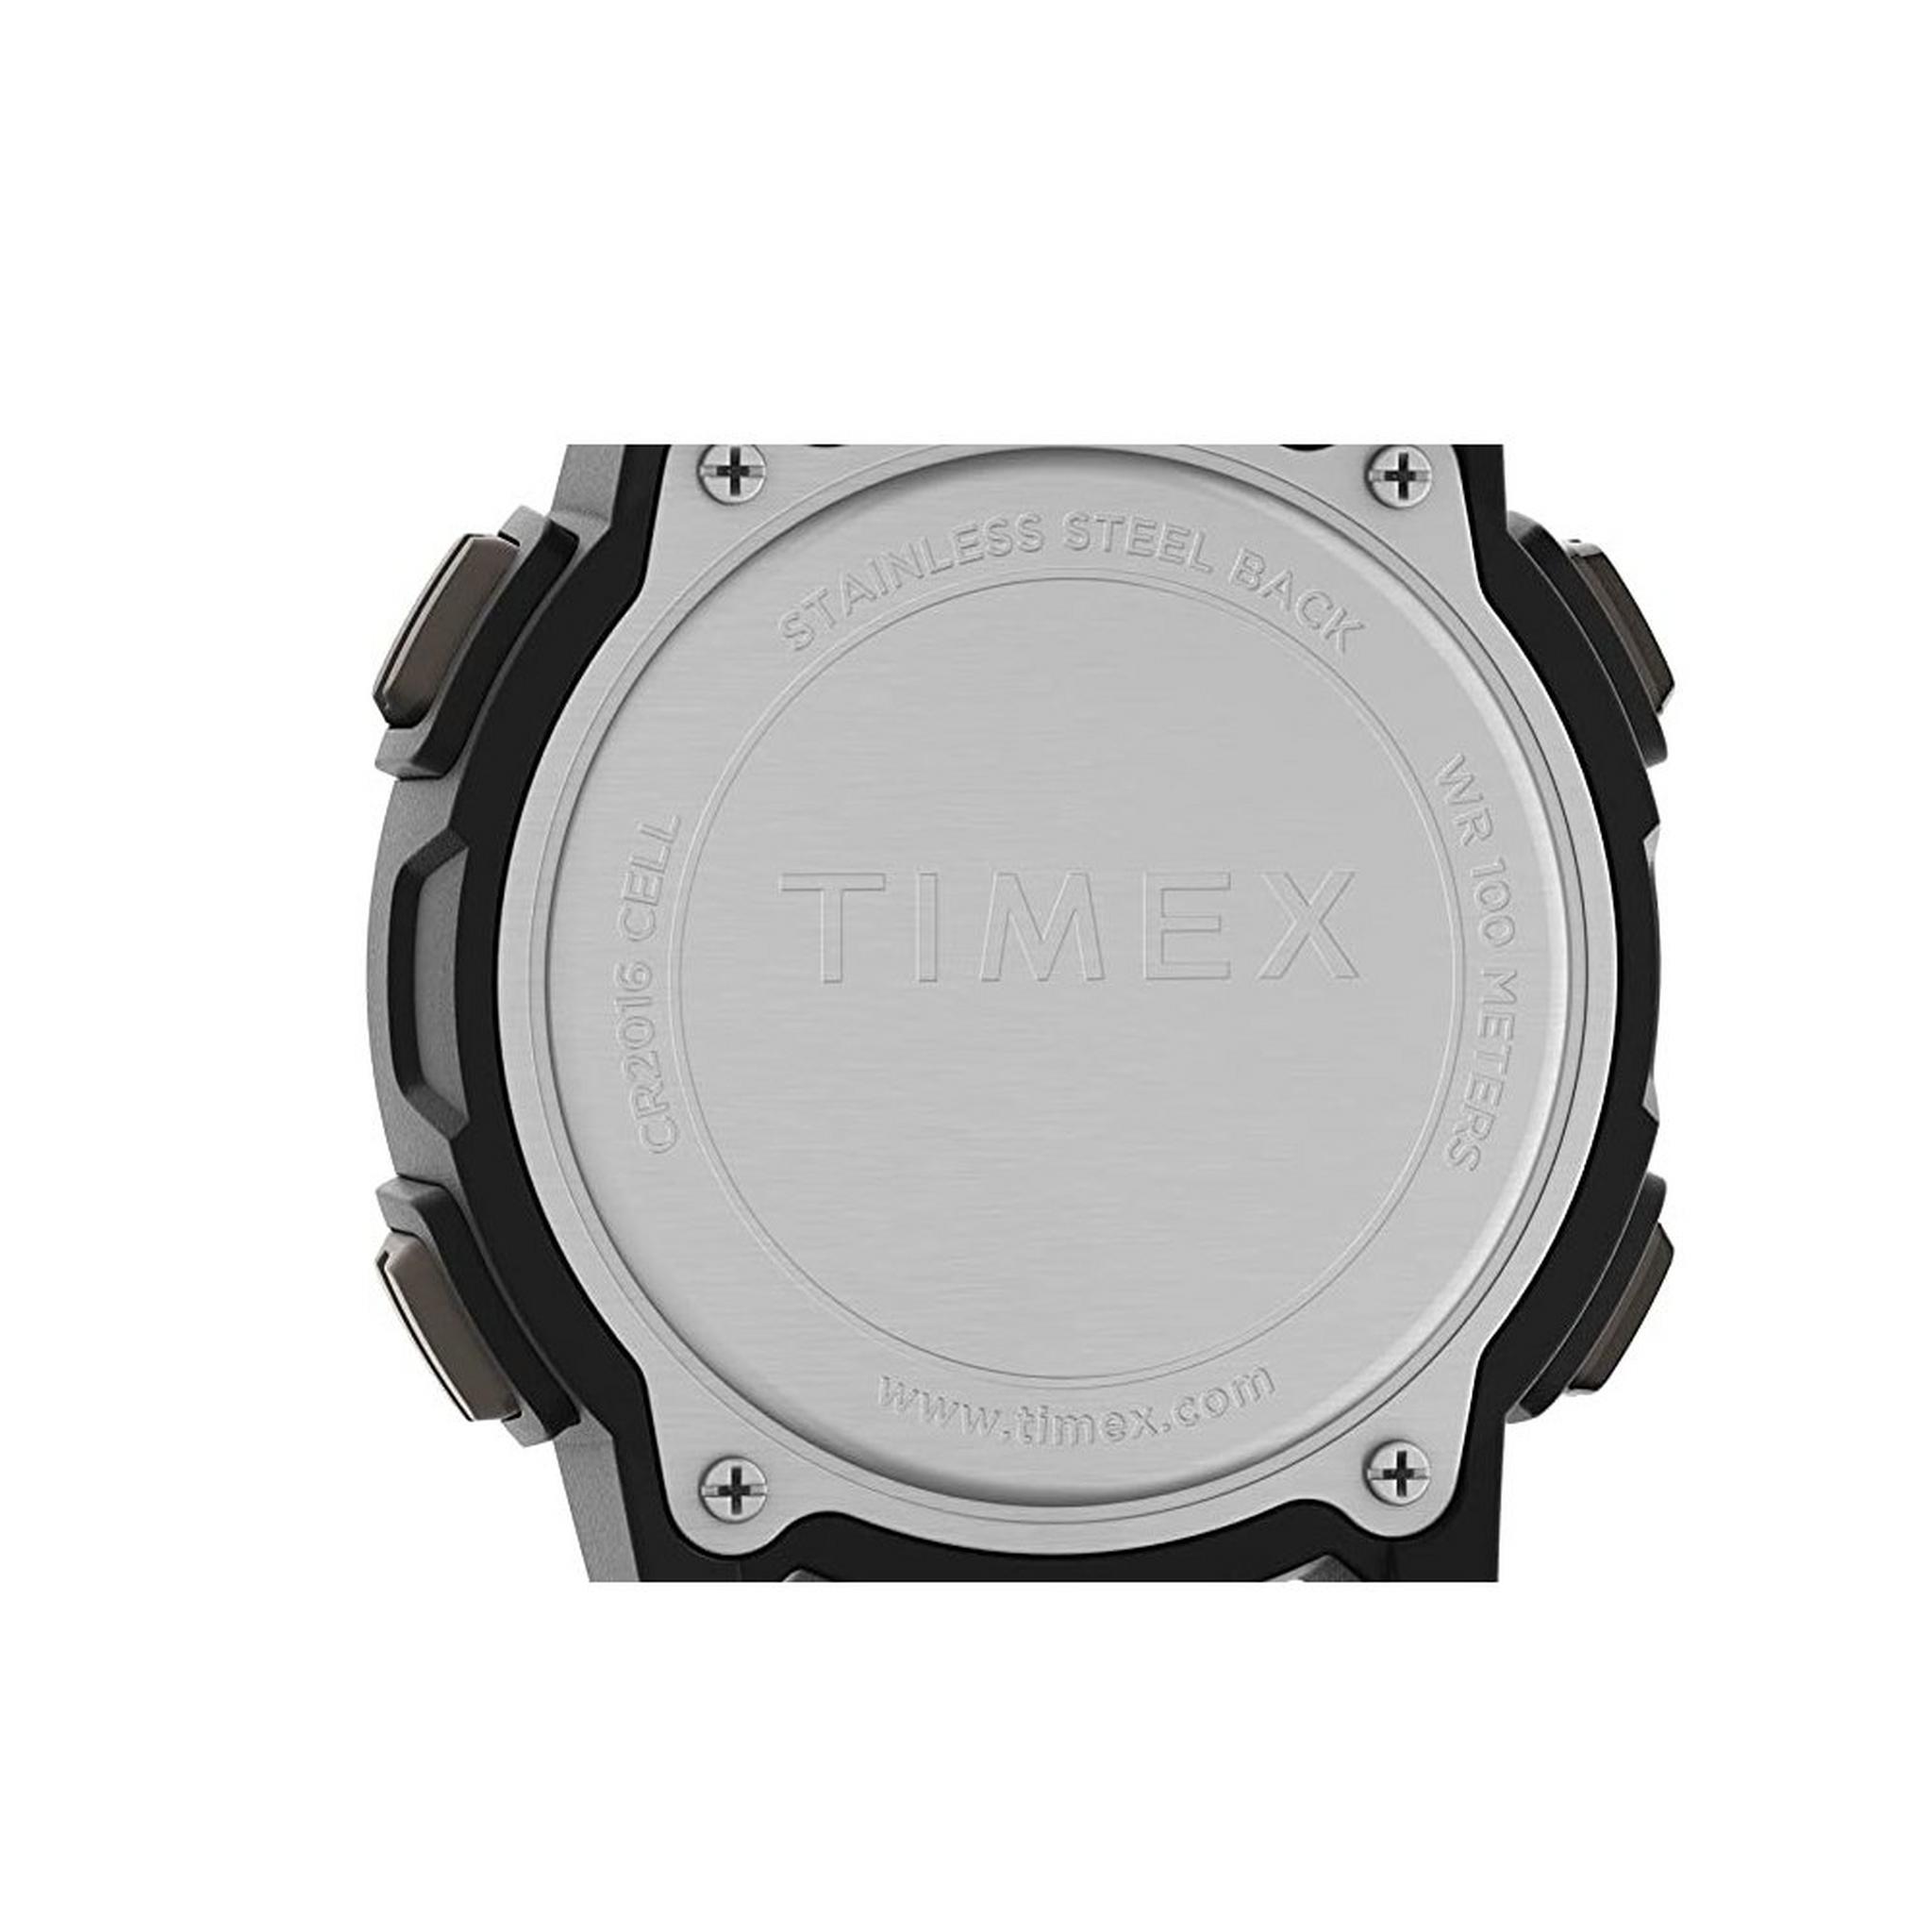 TIMEX Expedition Men's Watch, Digital, 41mm, Leather Strap, TW4B25200 - Black